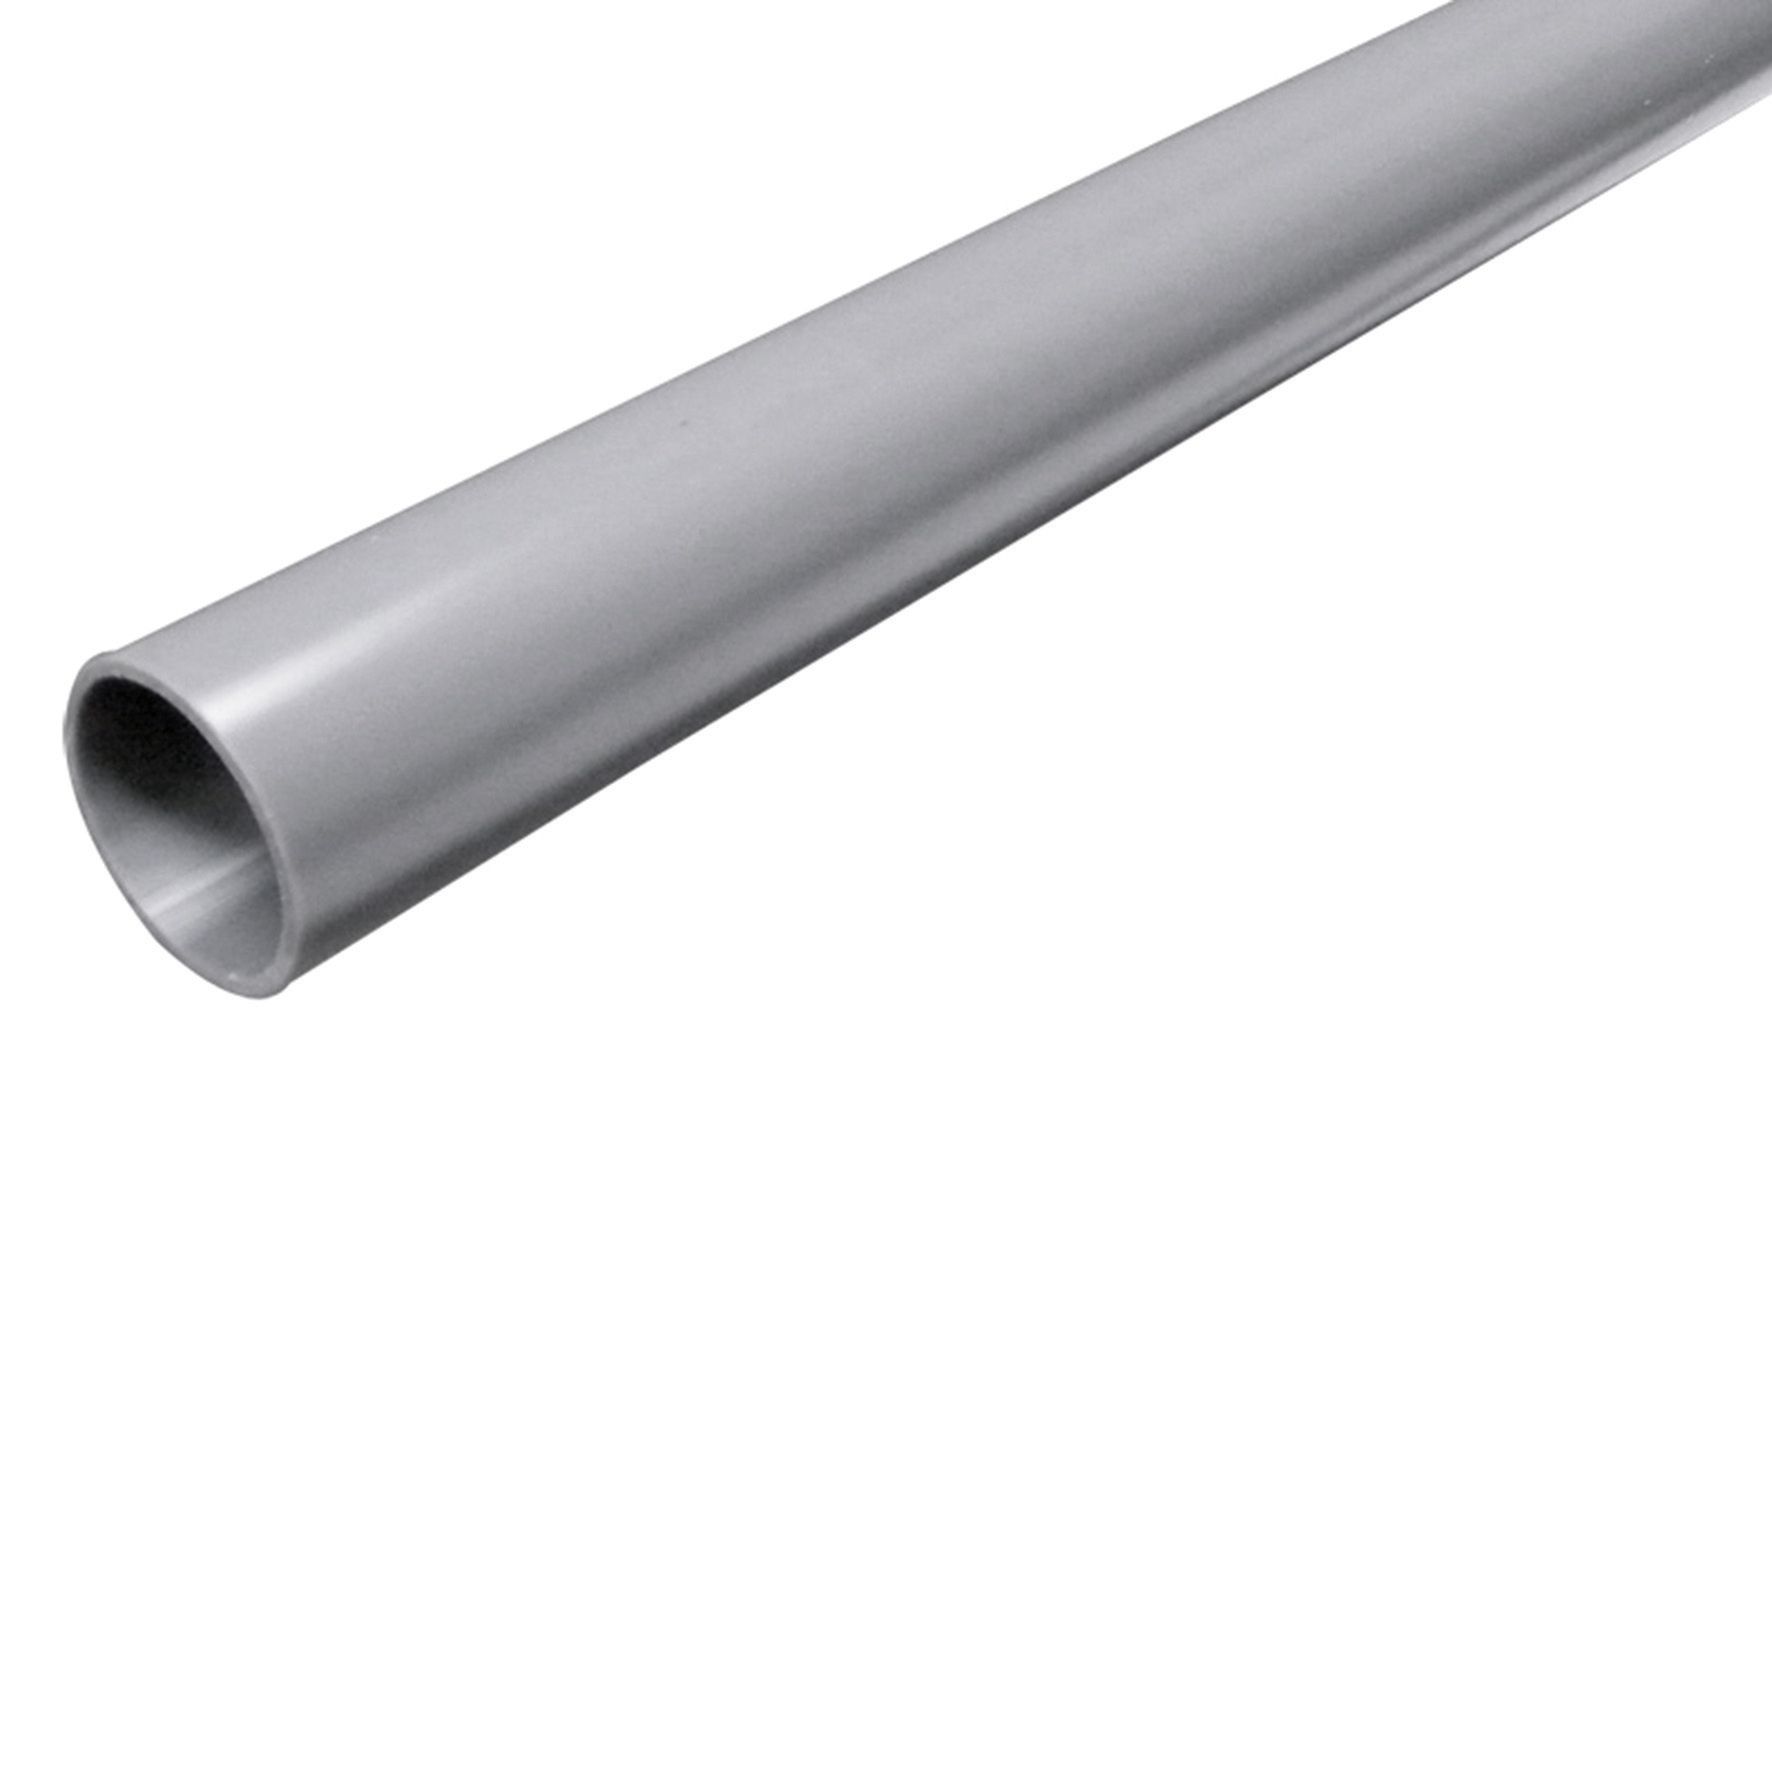 Image of FloPlast Solvent Weld Waste Pipe - Grey 40mm x 3m